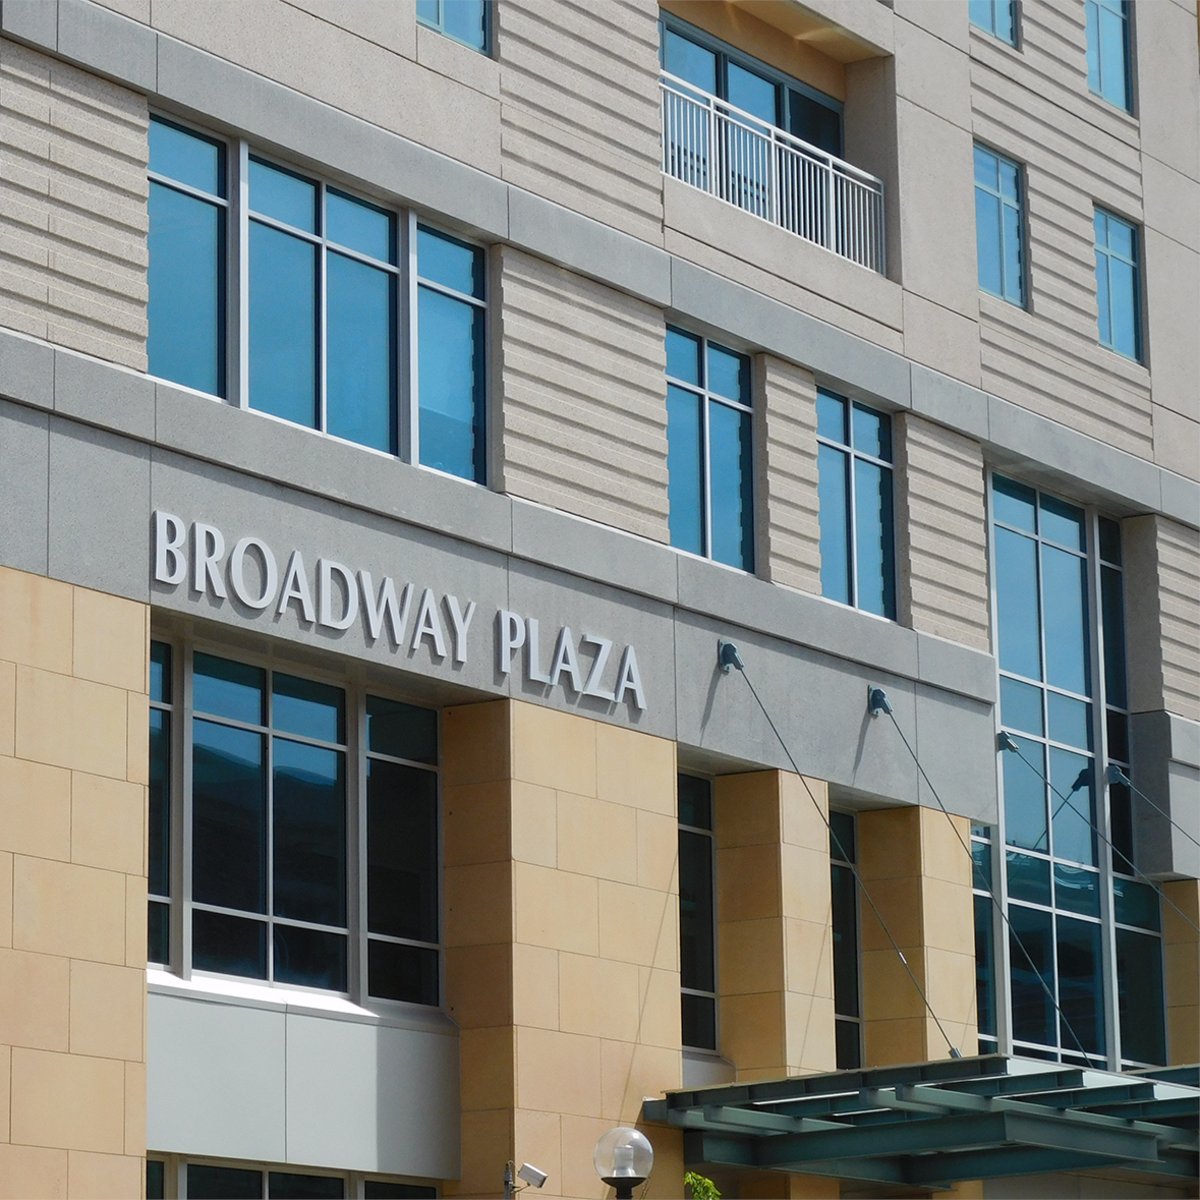 We are located steps away from the world-renowned #MayoClinic with direct access to the #Skyway, where guests can easily access shopping, restaurants, and the vibrancy of #downtownRochester. Book your stay with us and experience Rochester with ease. bit.ly/2RKvGfi